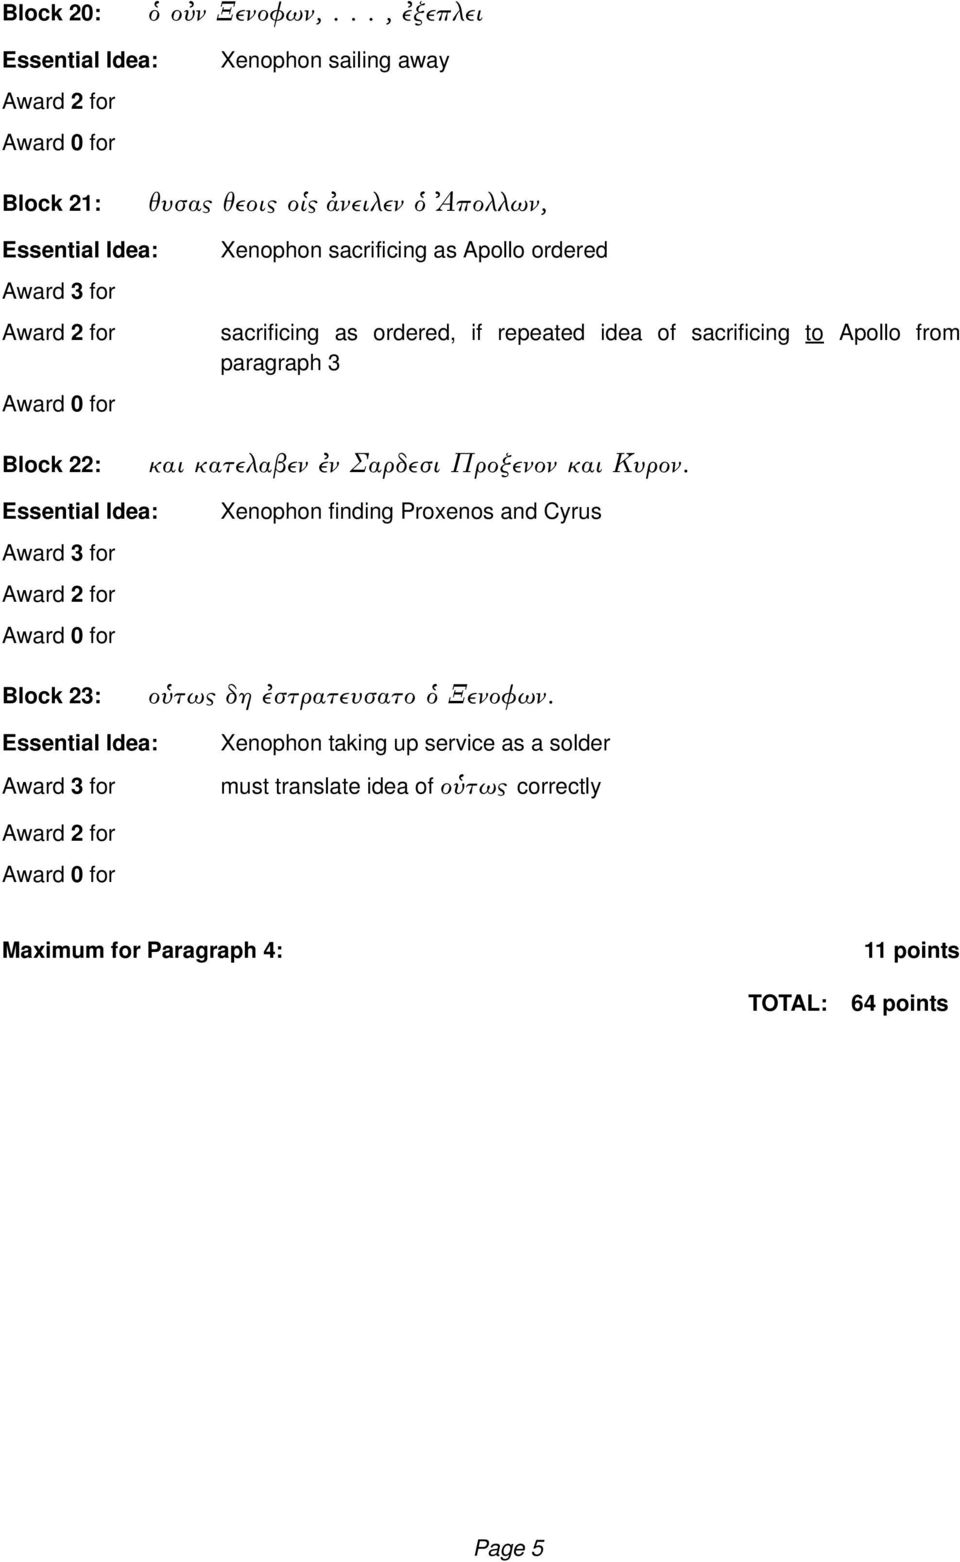 sacrificing as ordered, if repeated idea of sacrificing to Apollo from paragraph 3 Block 22: και κατελαβεν ν Σαρδεσι